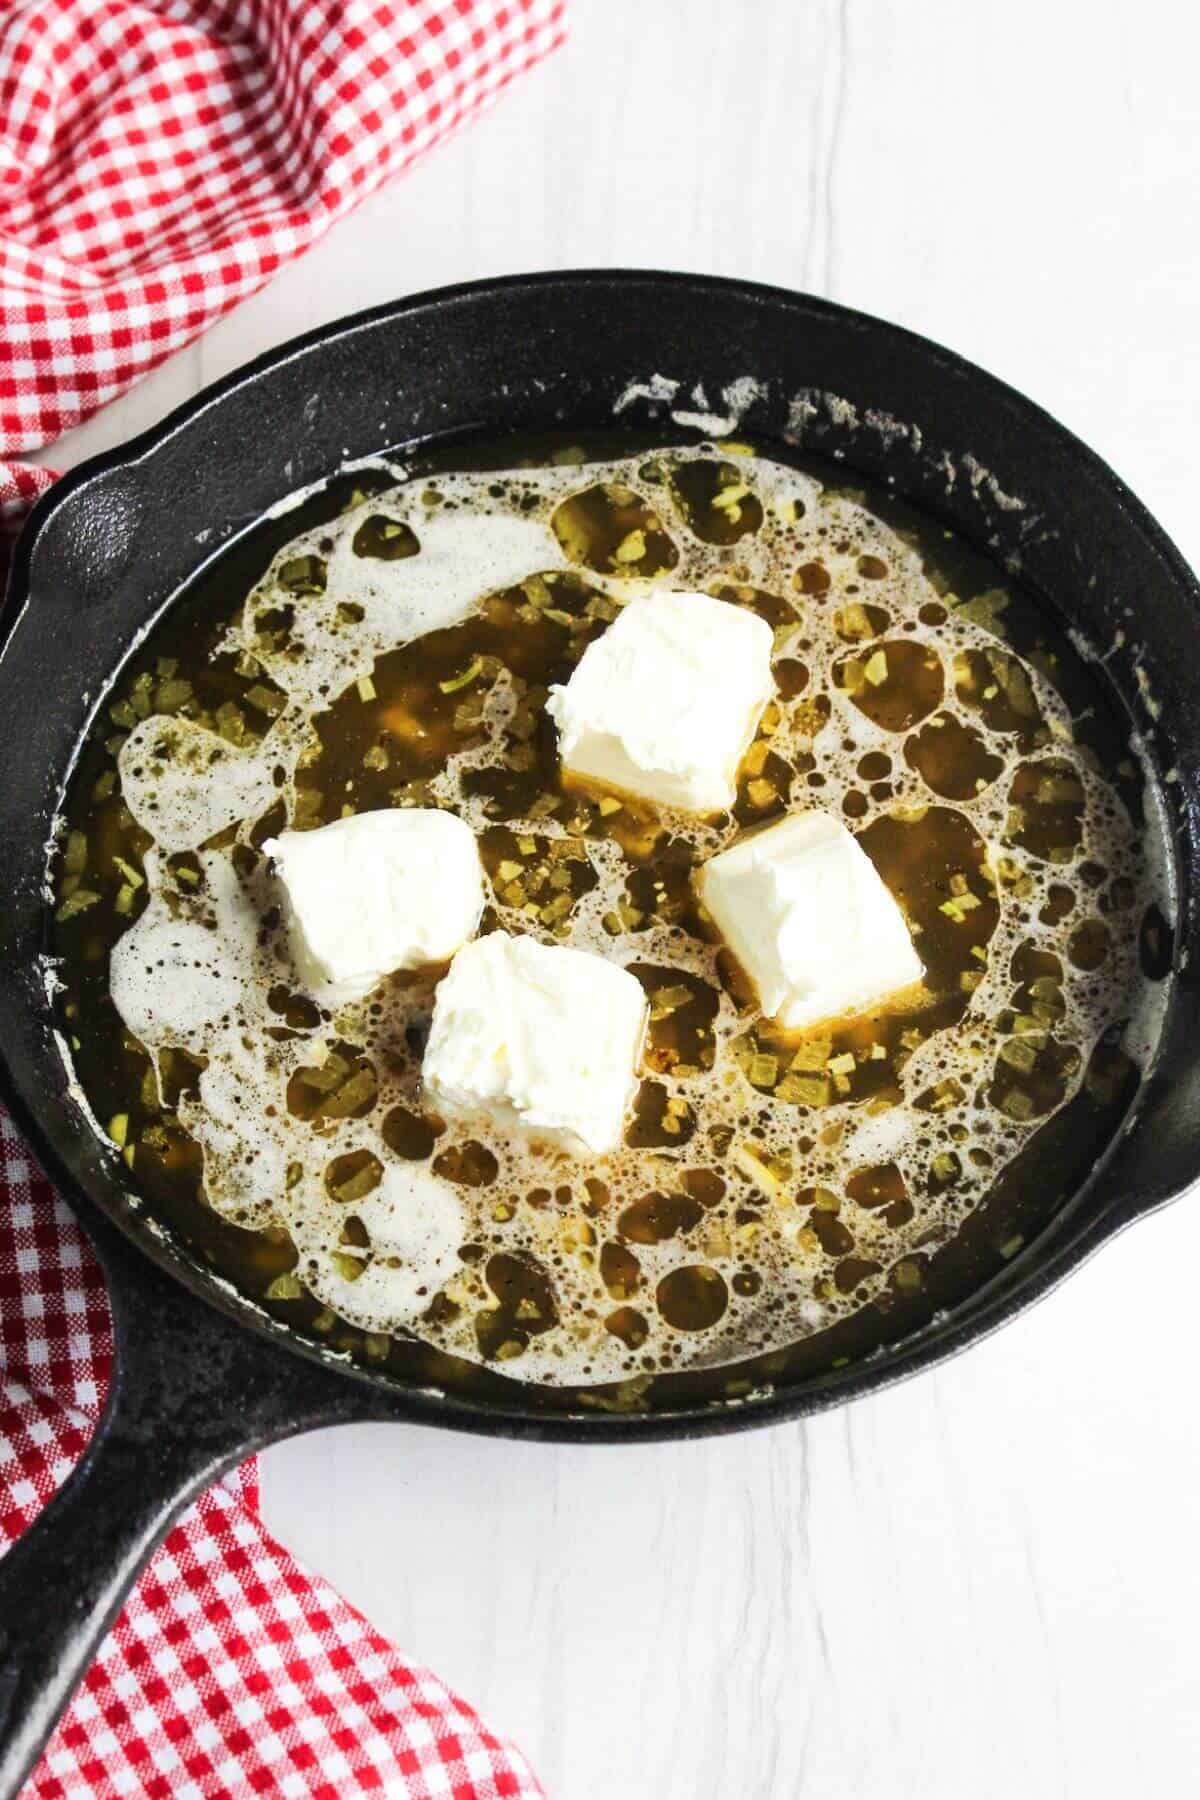 A cast iron skillet with butter pieces in it.